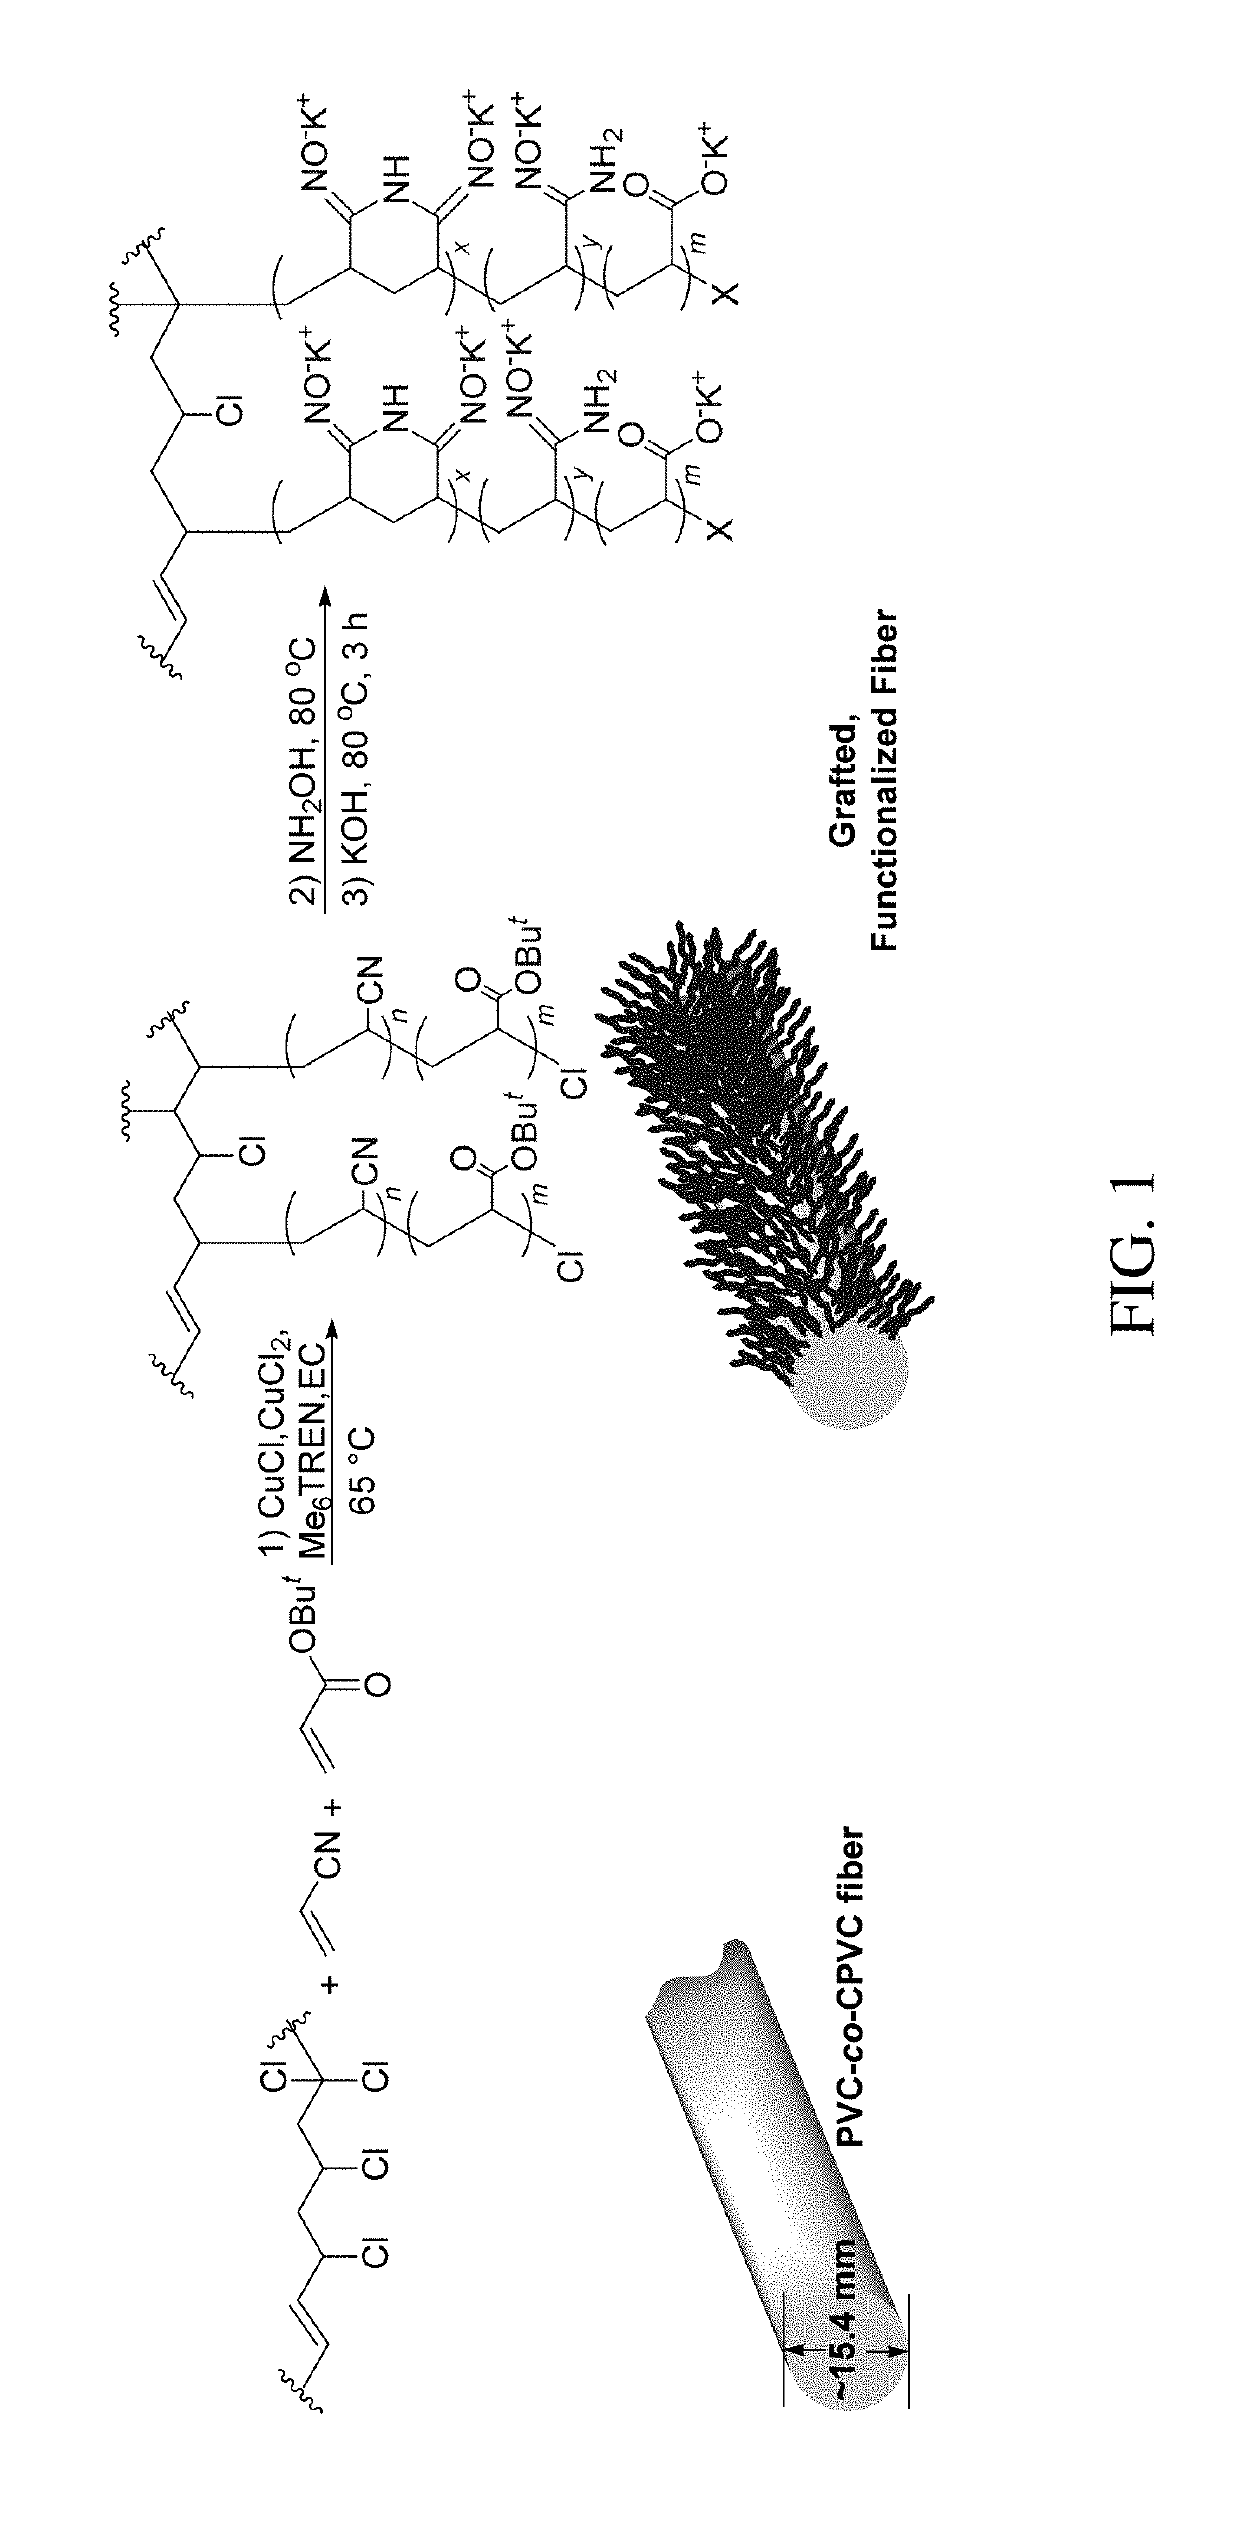 Surface-functionalized polyolefin fibers and their use in methods for extracting metal ions from liquid solutions